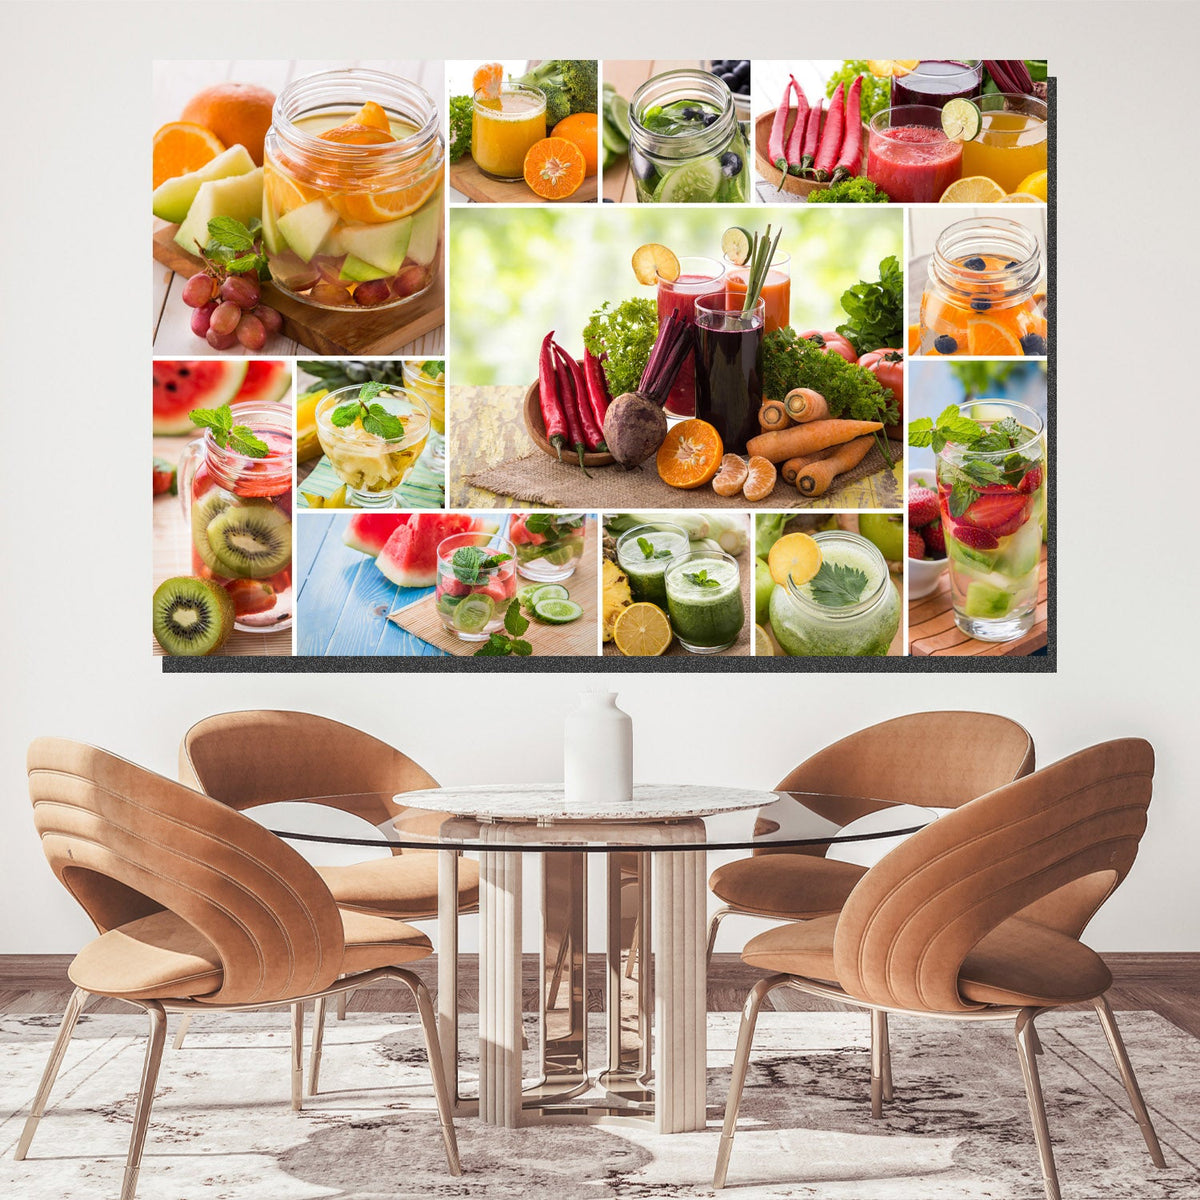 https://cdn.shopify.com/s/files/1/0387/9986/8044/products/InfusedWaterCollageCanvasArtprintStretched-1.jpg